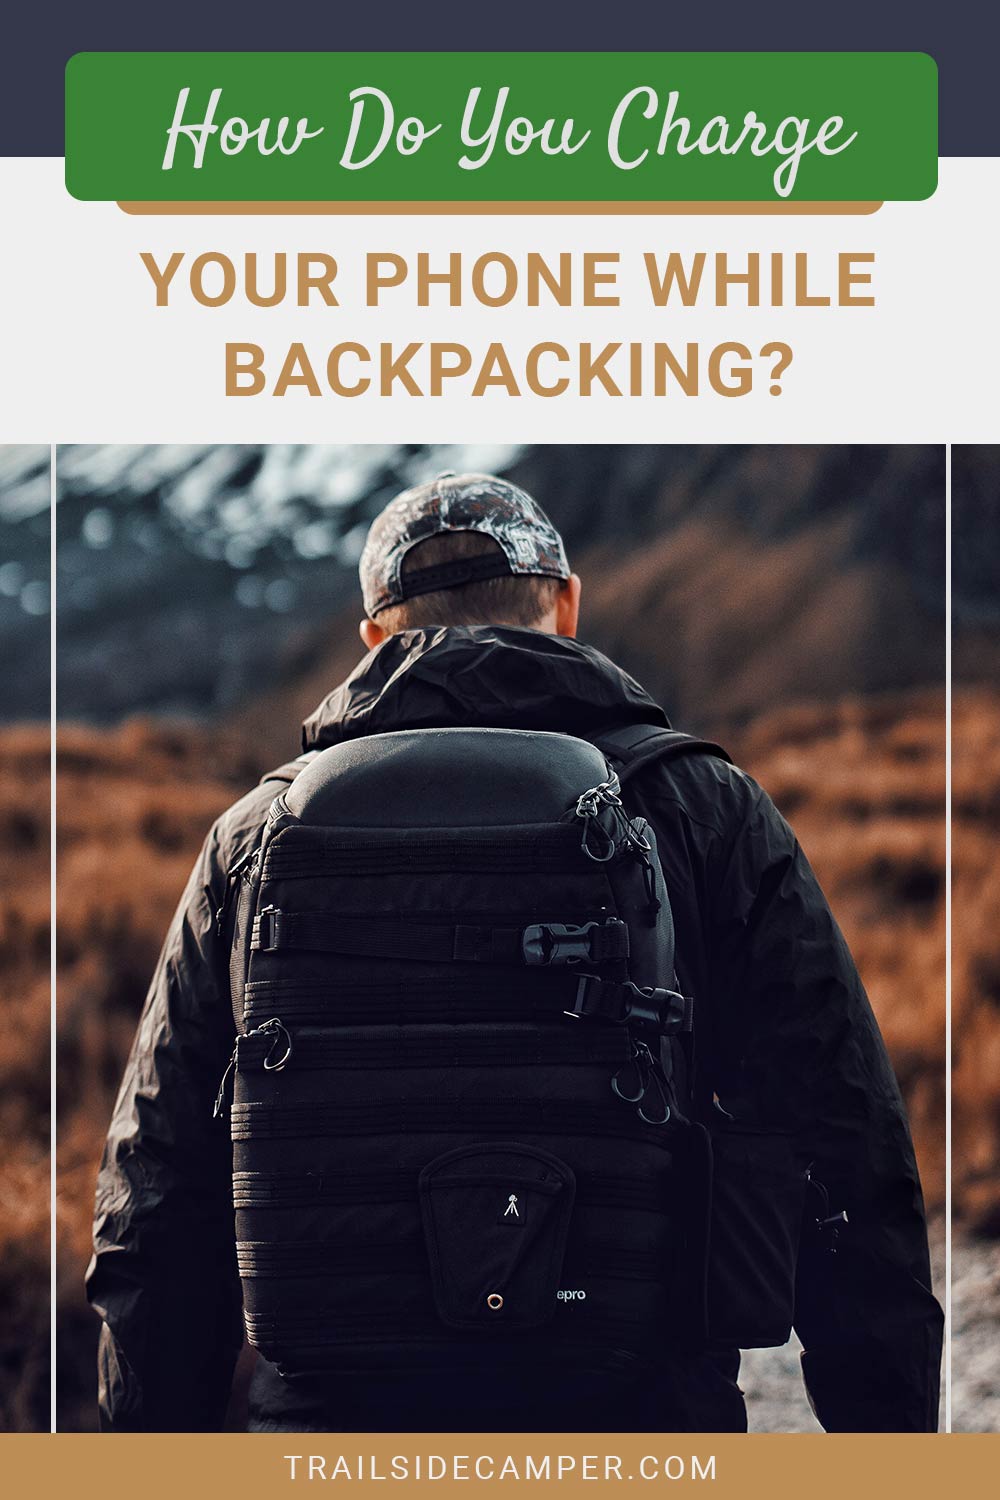 How Do You Charge Your Phone While Backpacking?